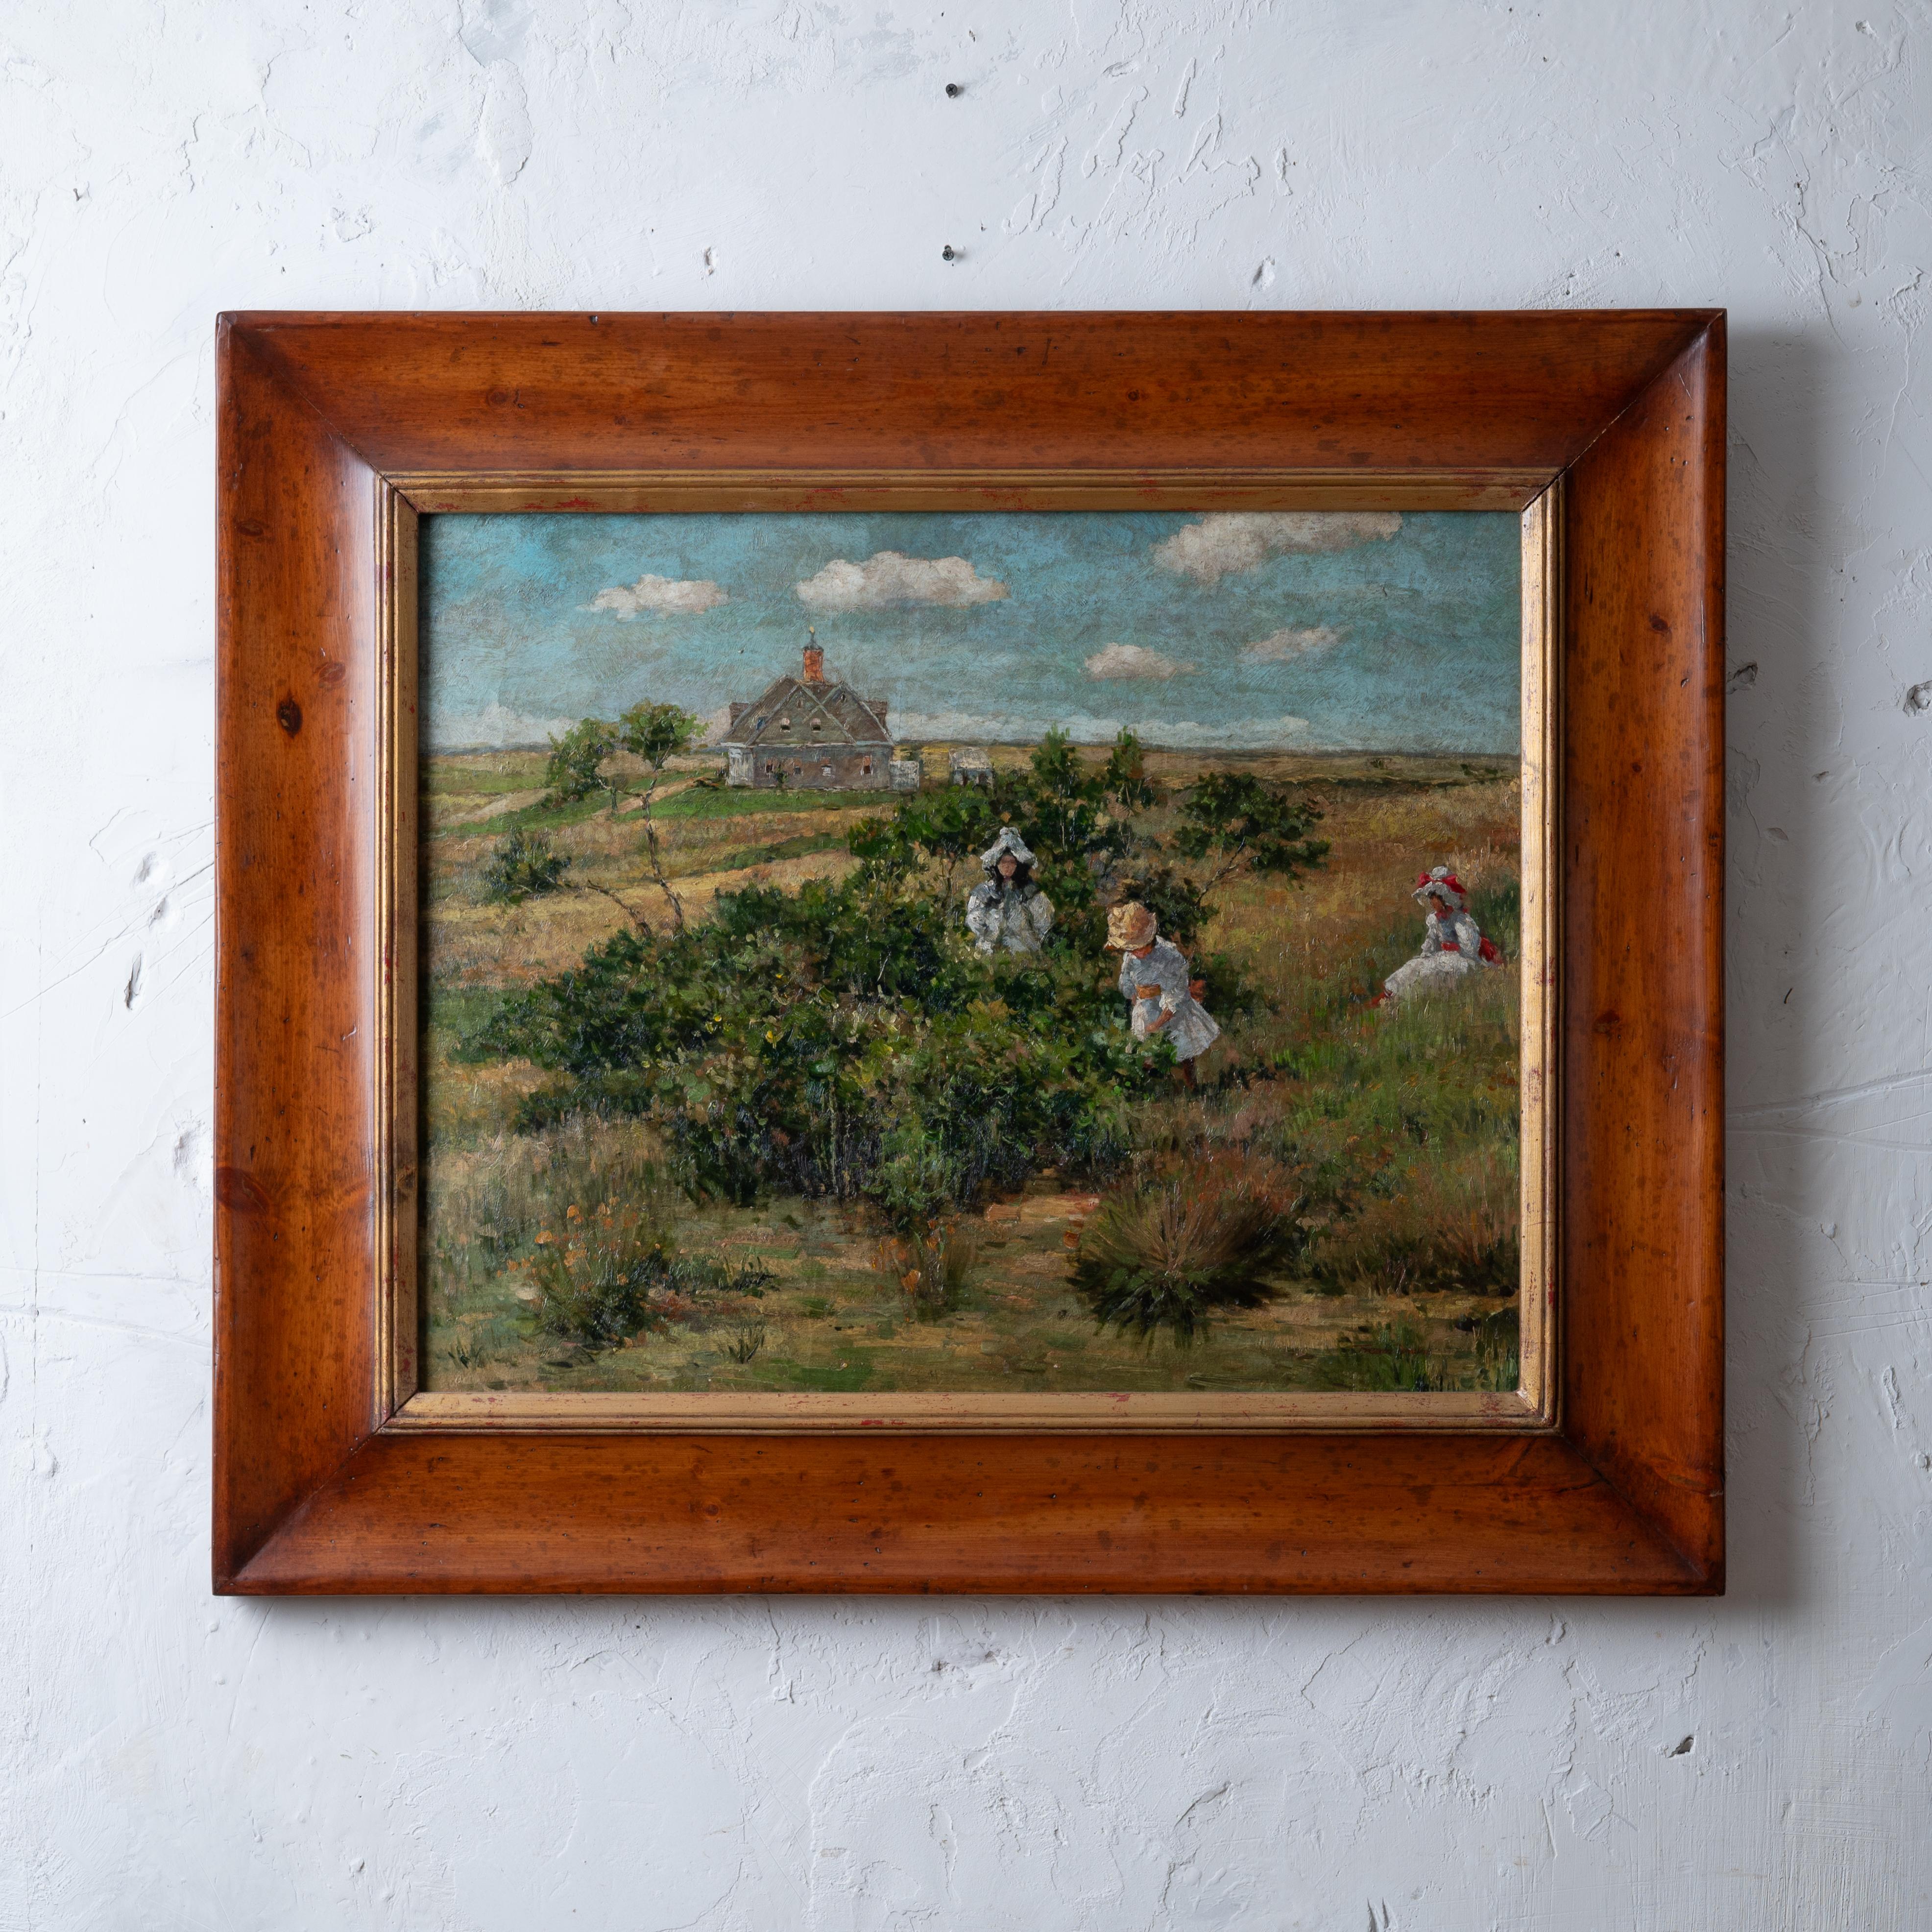 An impressionist landscape by Trevor James after William Merritt Chase, entitled The Big Bayberry Bush, depicting the Chase homestead at Shinnecock with girls at play in the bayberry bush.

sight: 29 ½ by 23 ½ inches
frame: 40 ½ by 34 ¼ inches

Very